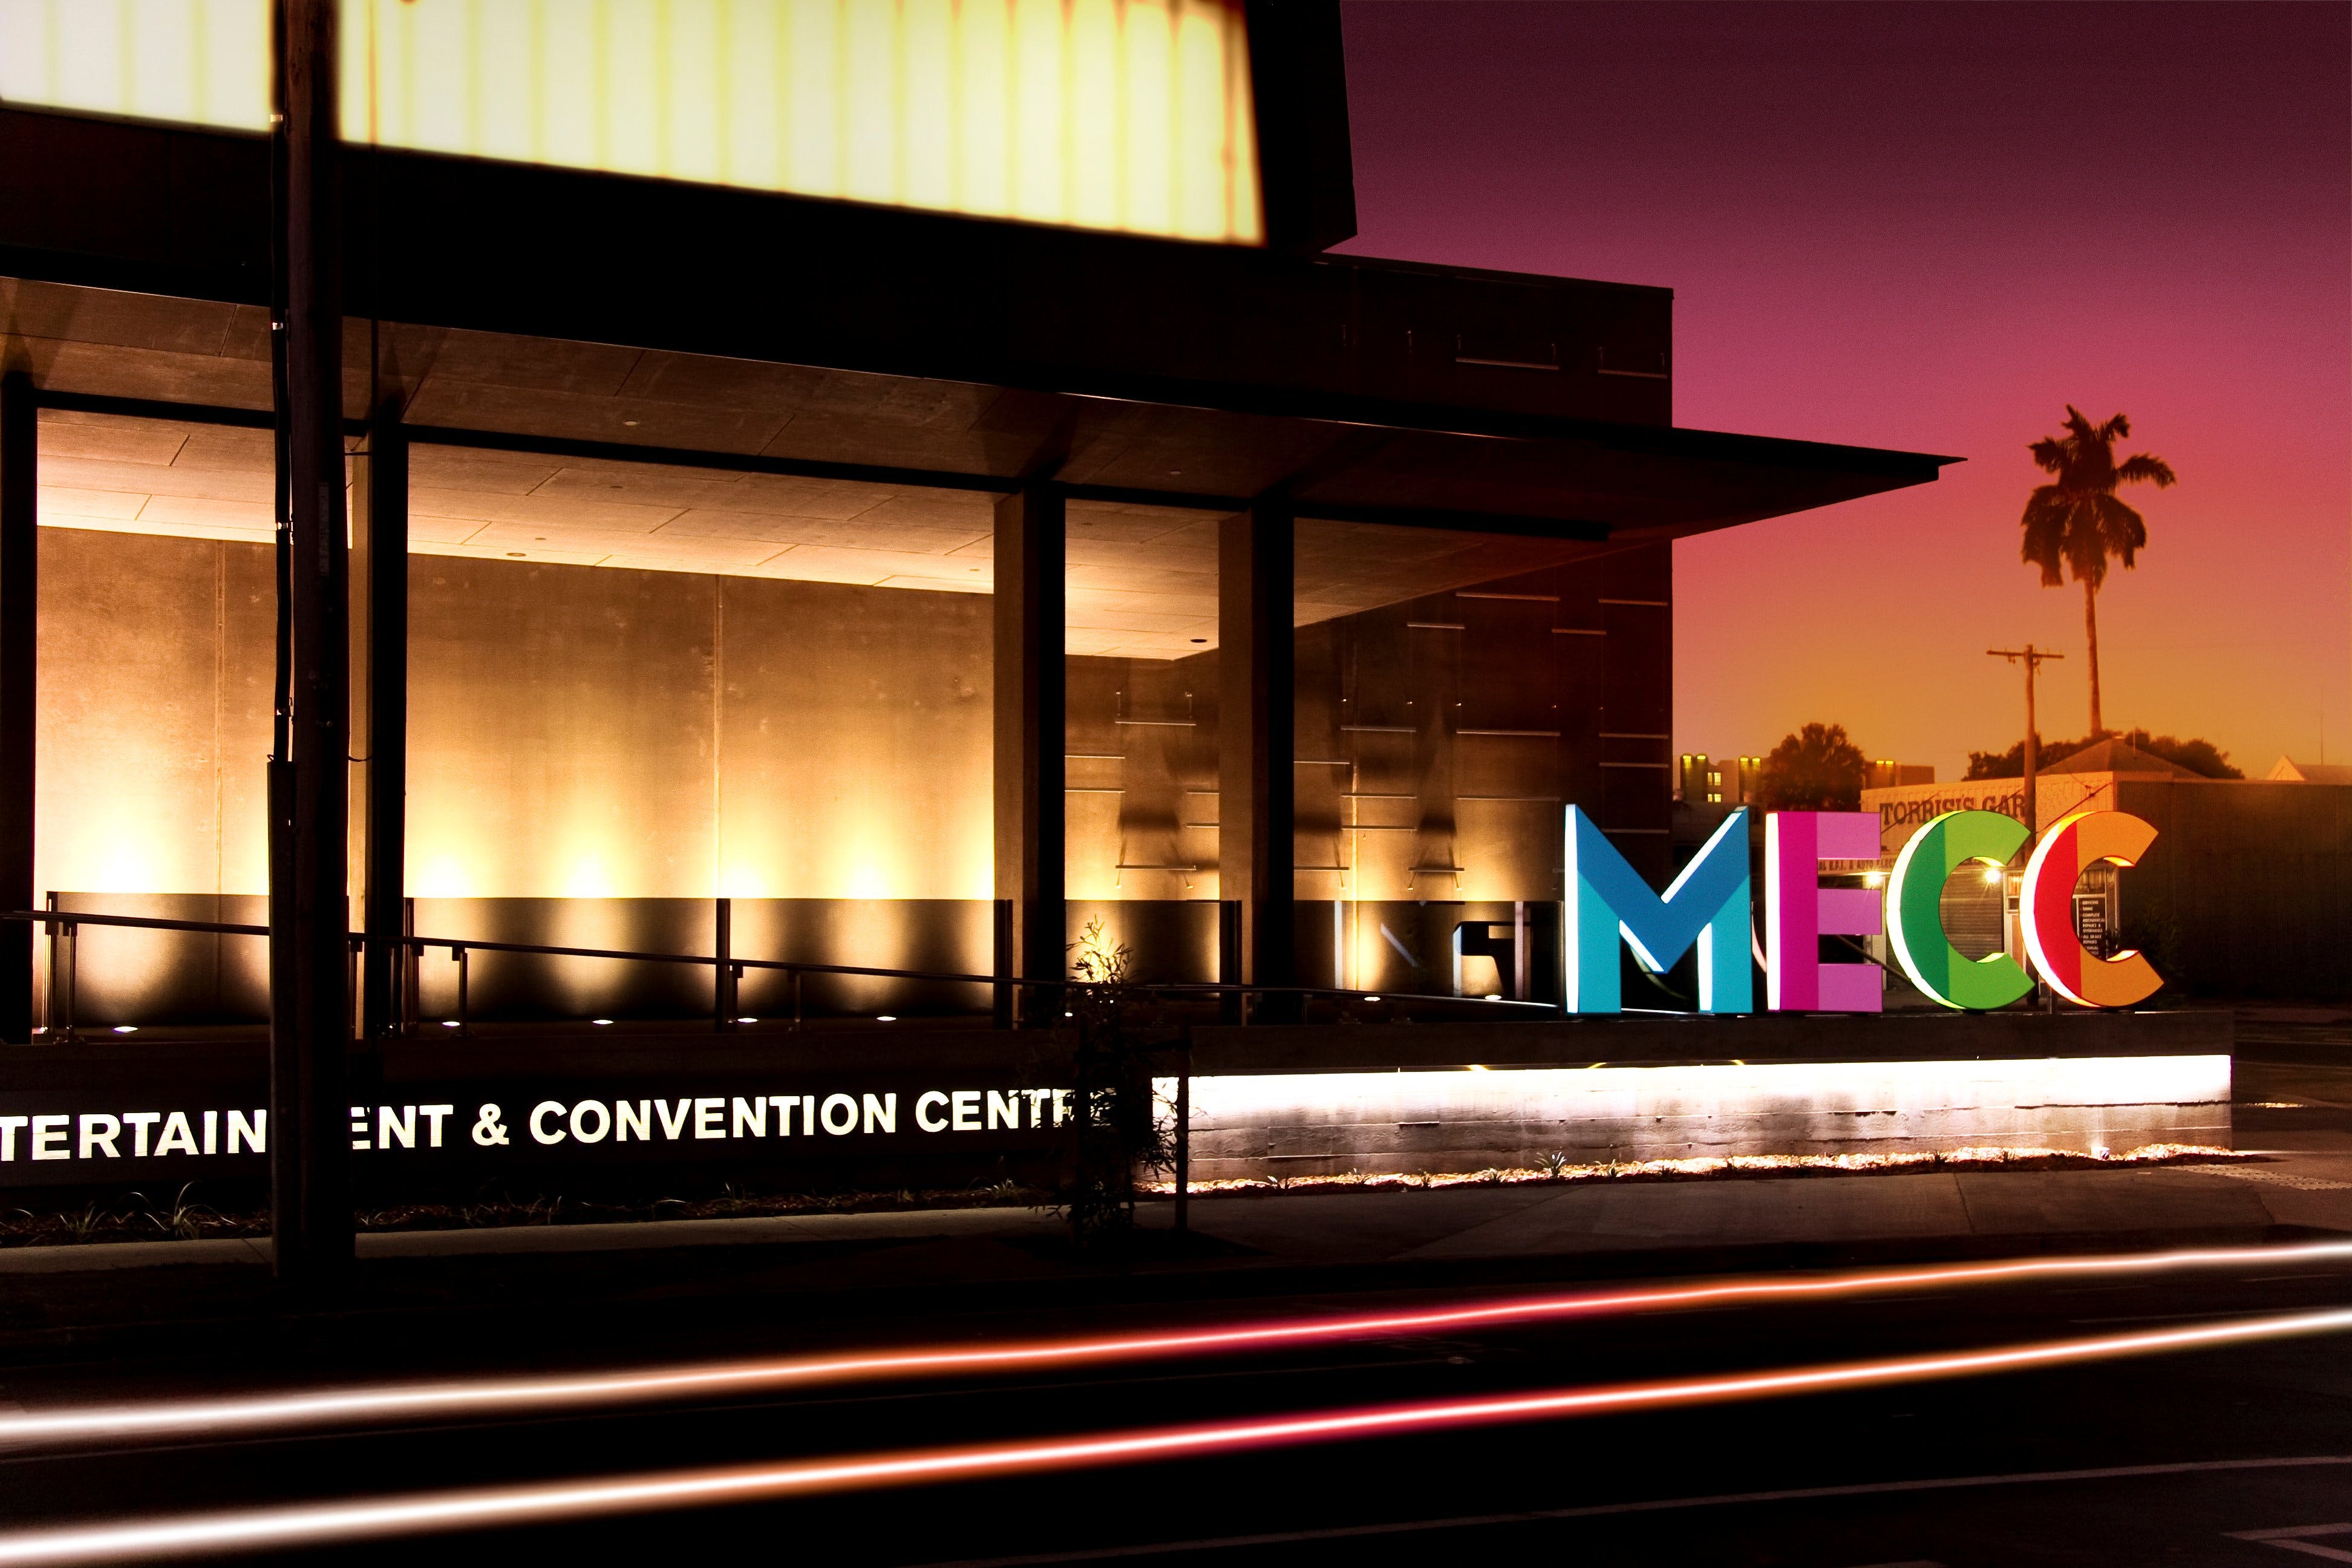 Mackay Entertainment and Convention Centre